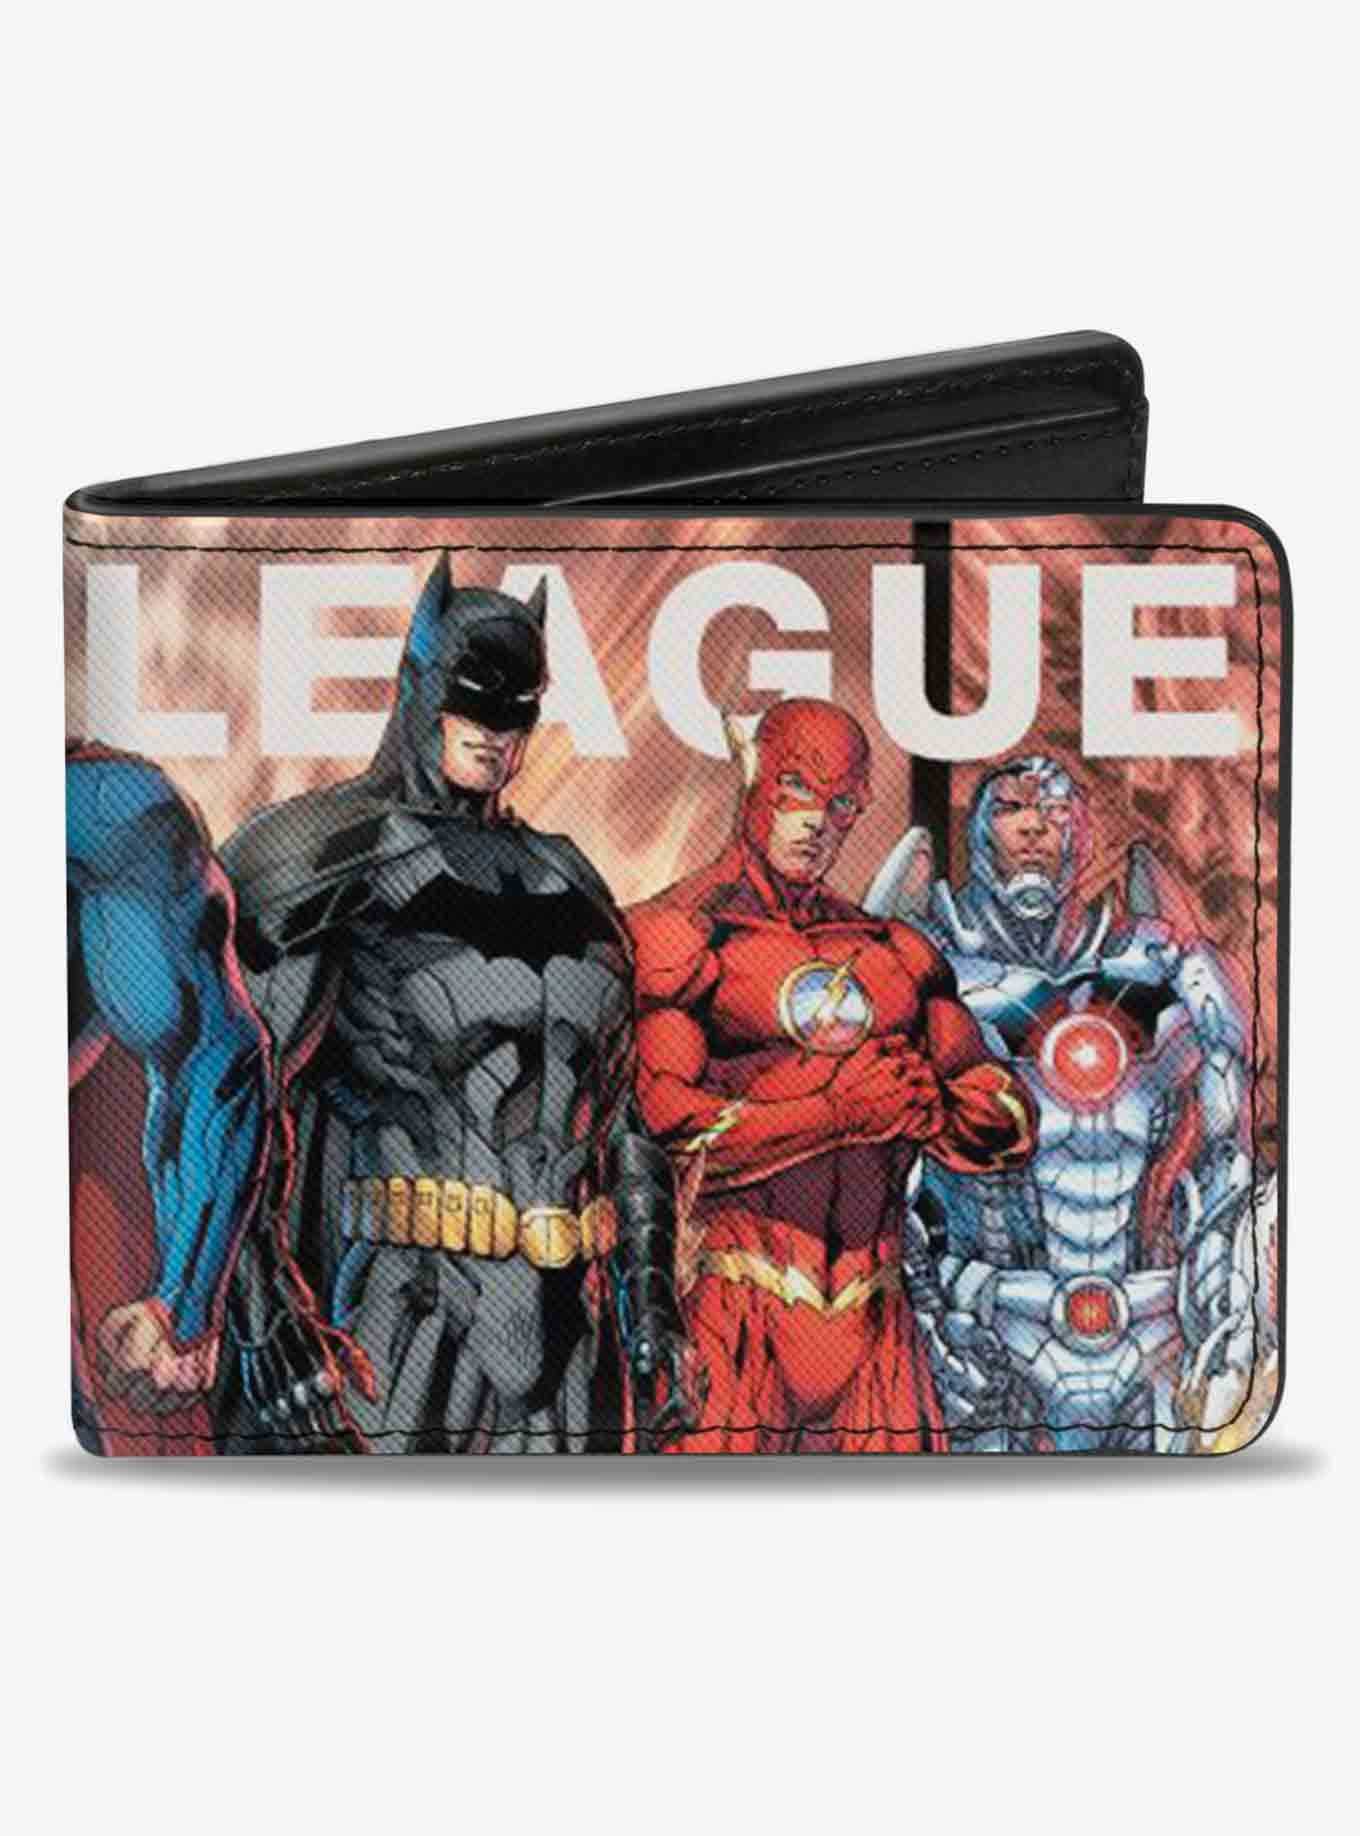 DC Comics The New 52 Justice League Issue 1 7 Superhero Variant Cover Bifold Wallet, , hi-res